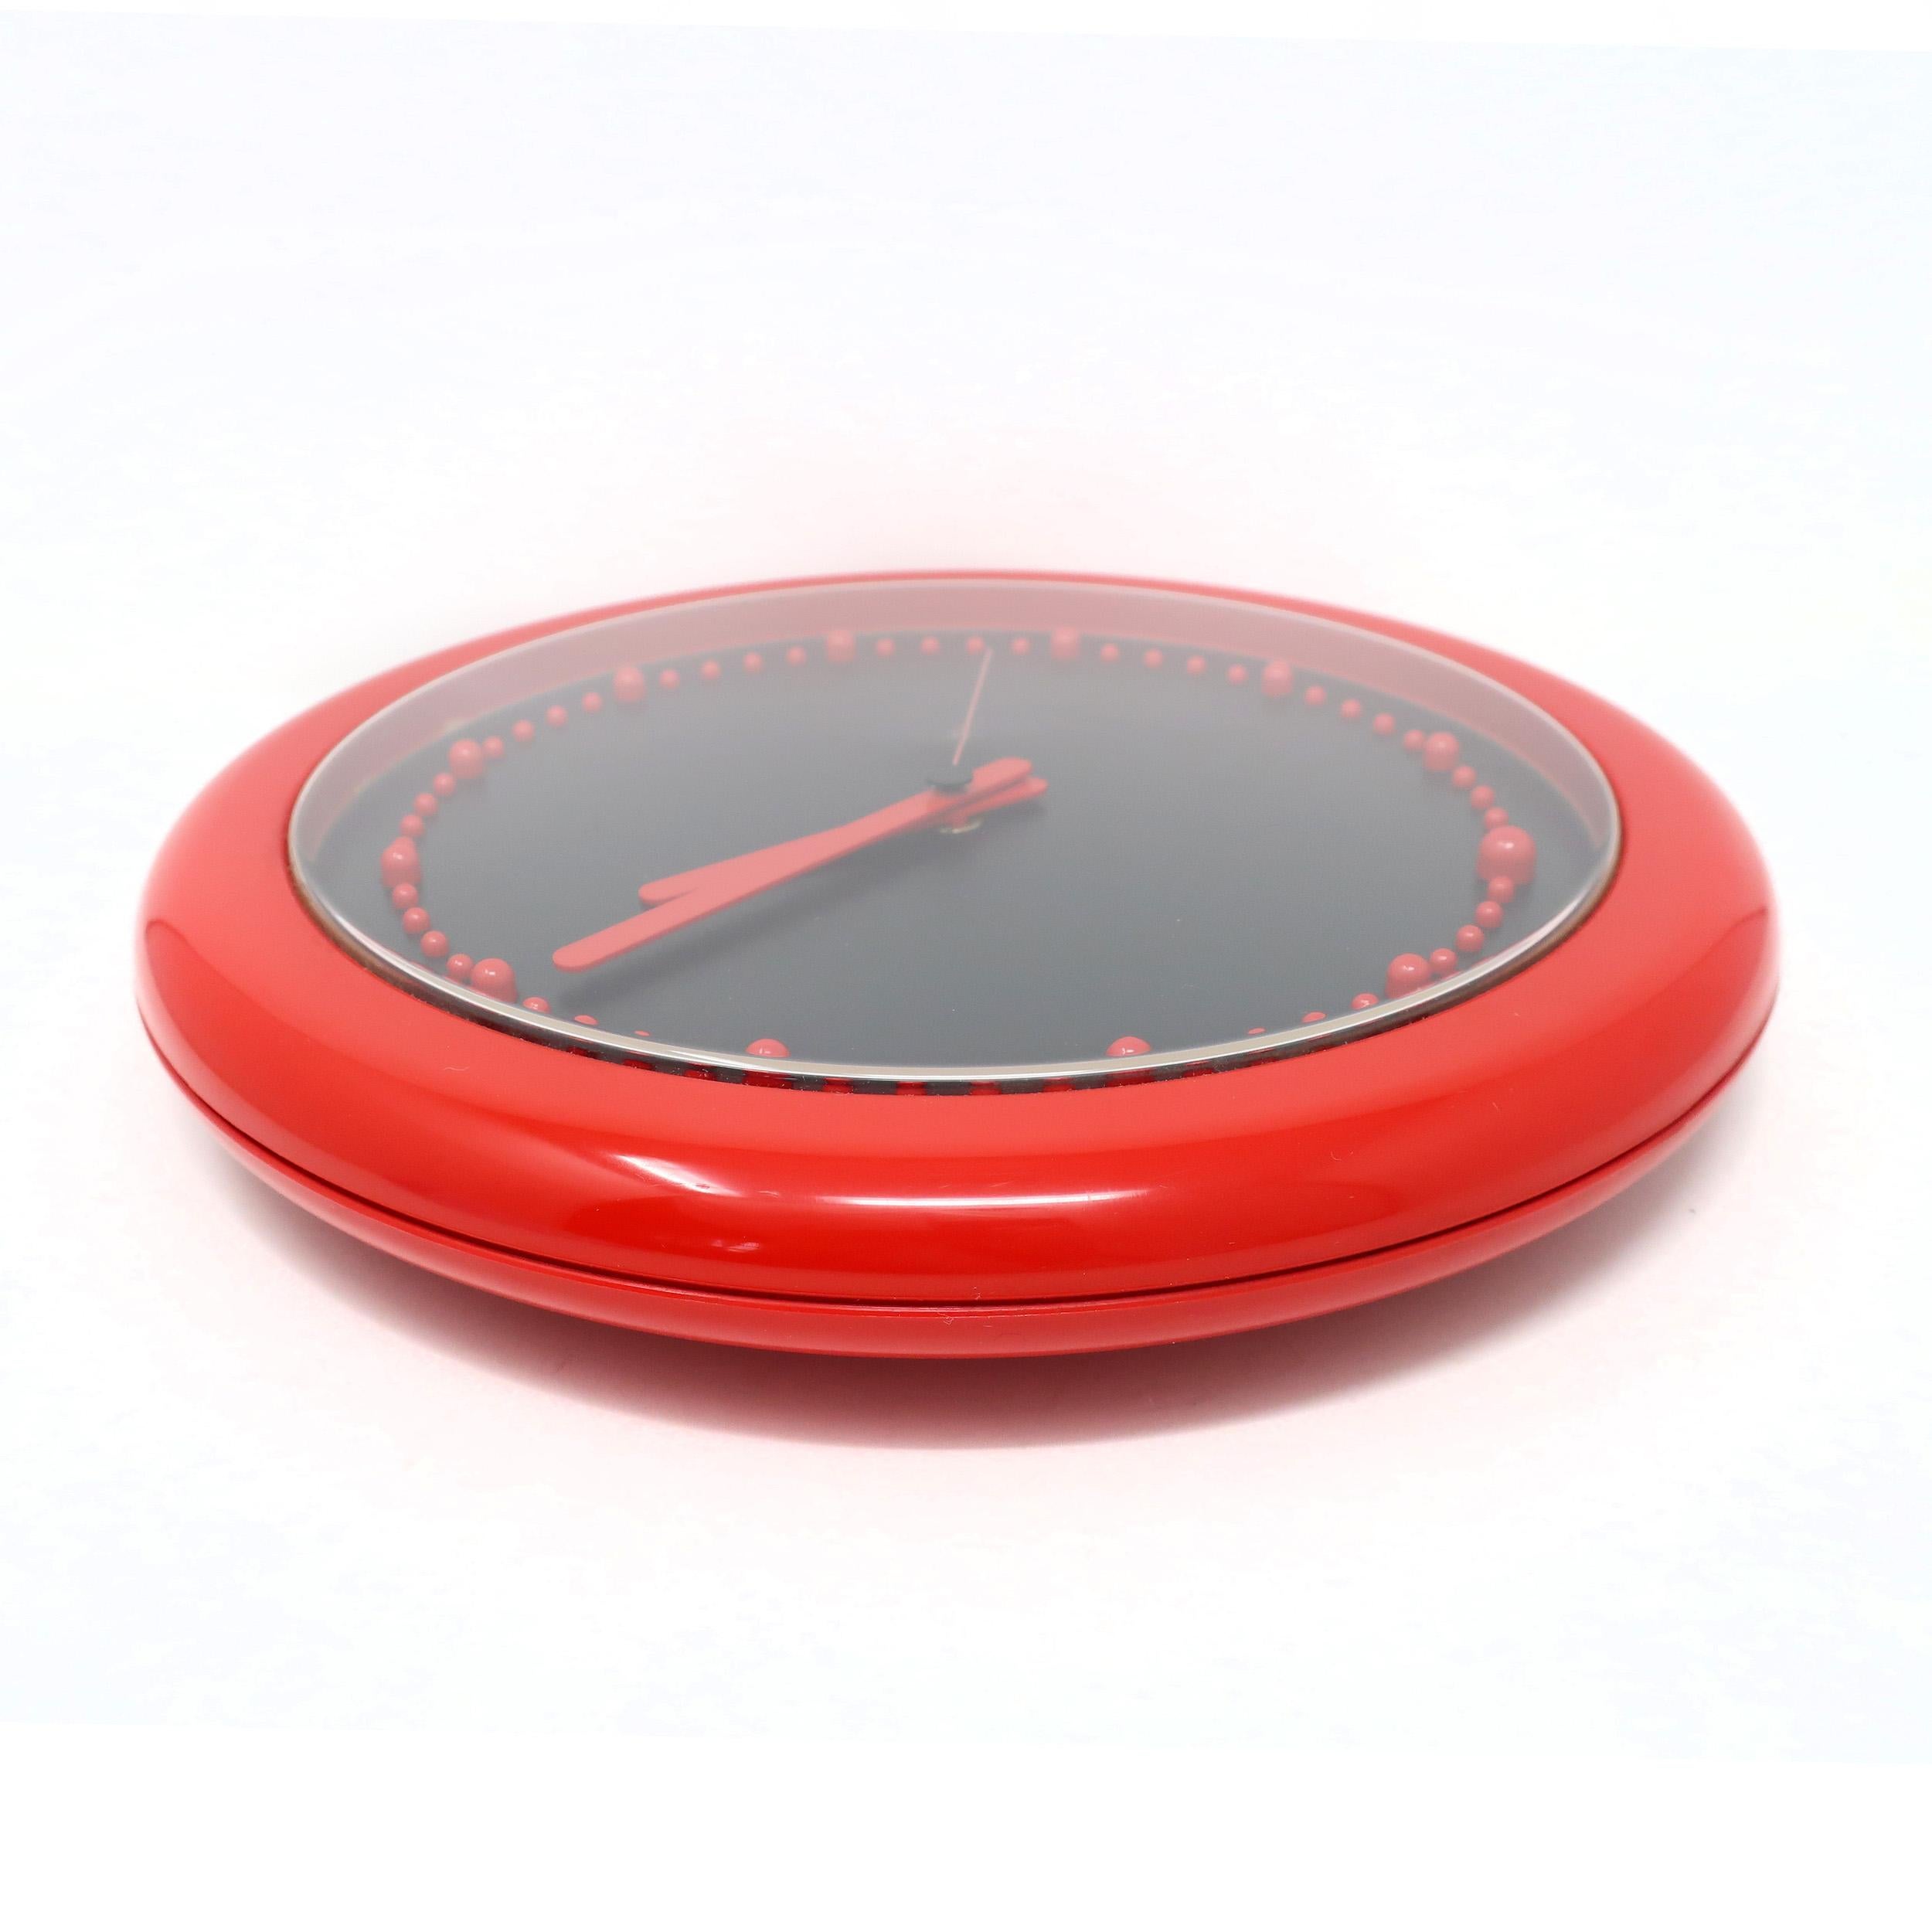 Post-Modern 1980s Postmodern Red and Black Rexite Zero 980 Wall Clock 